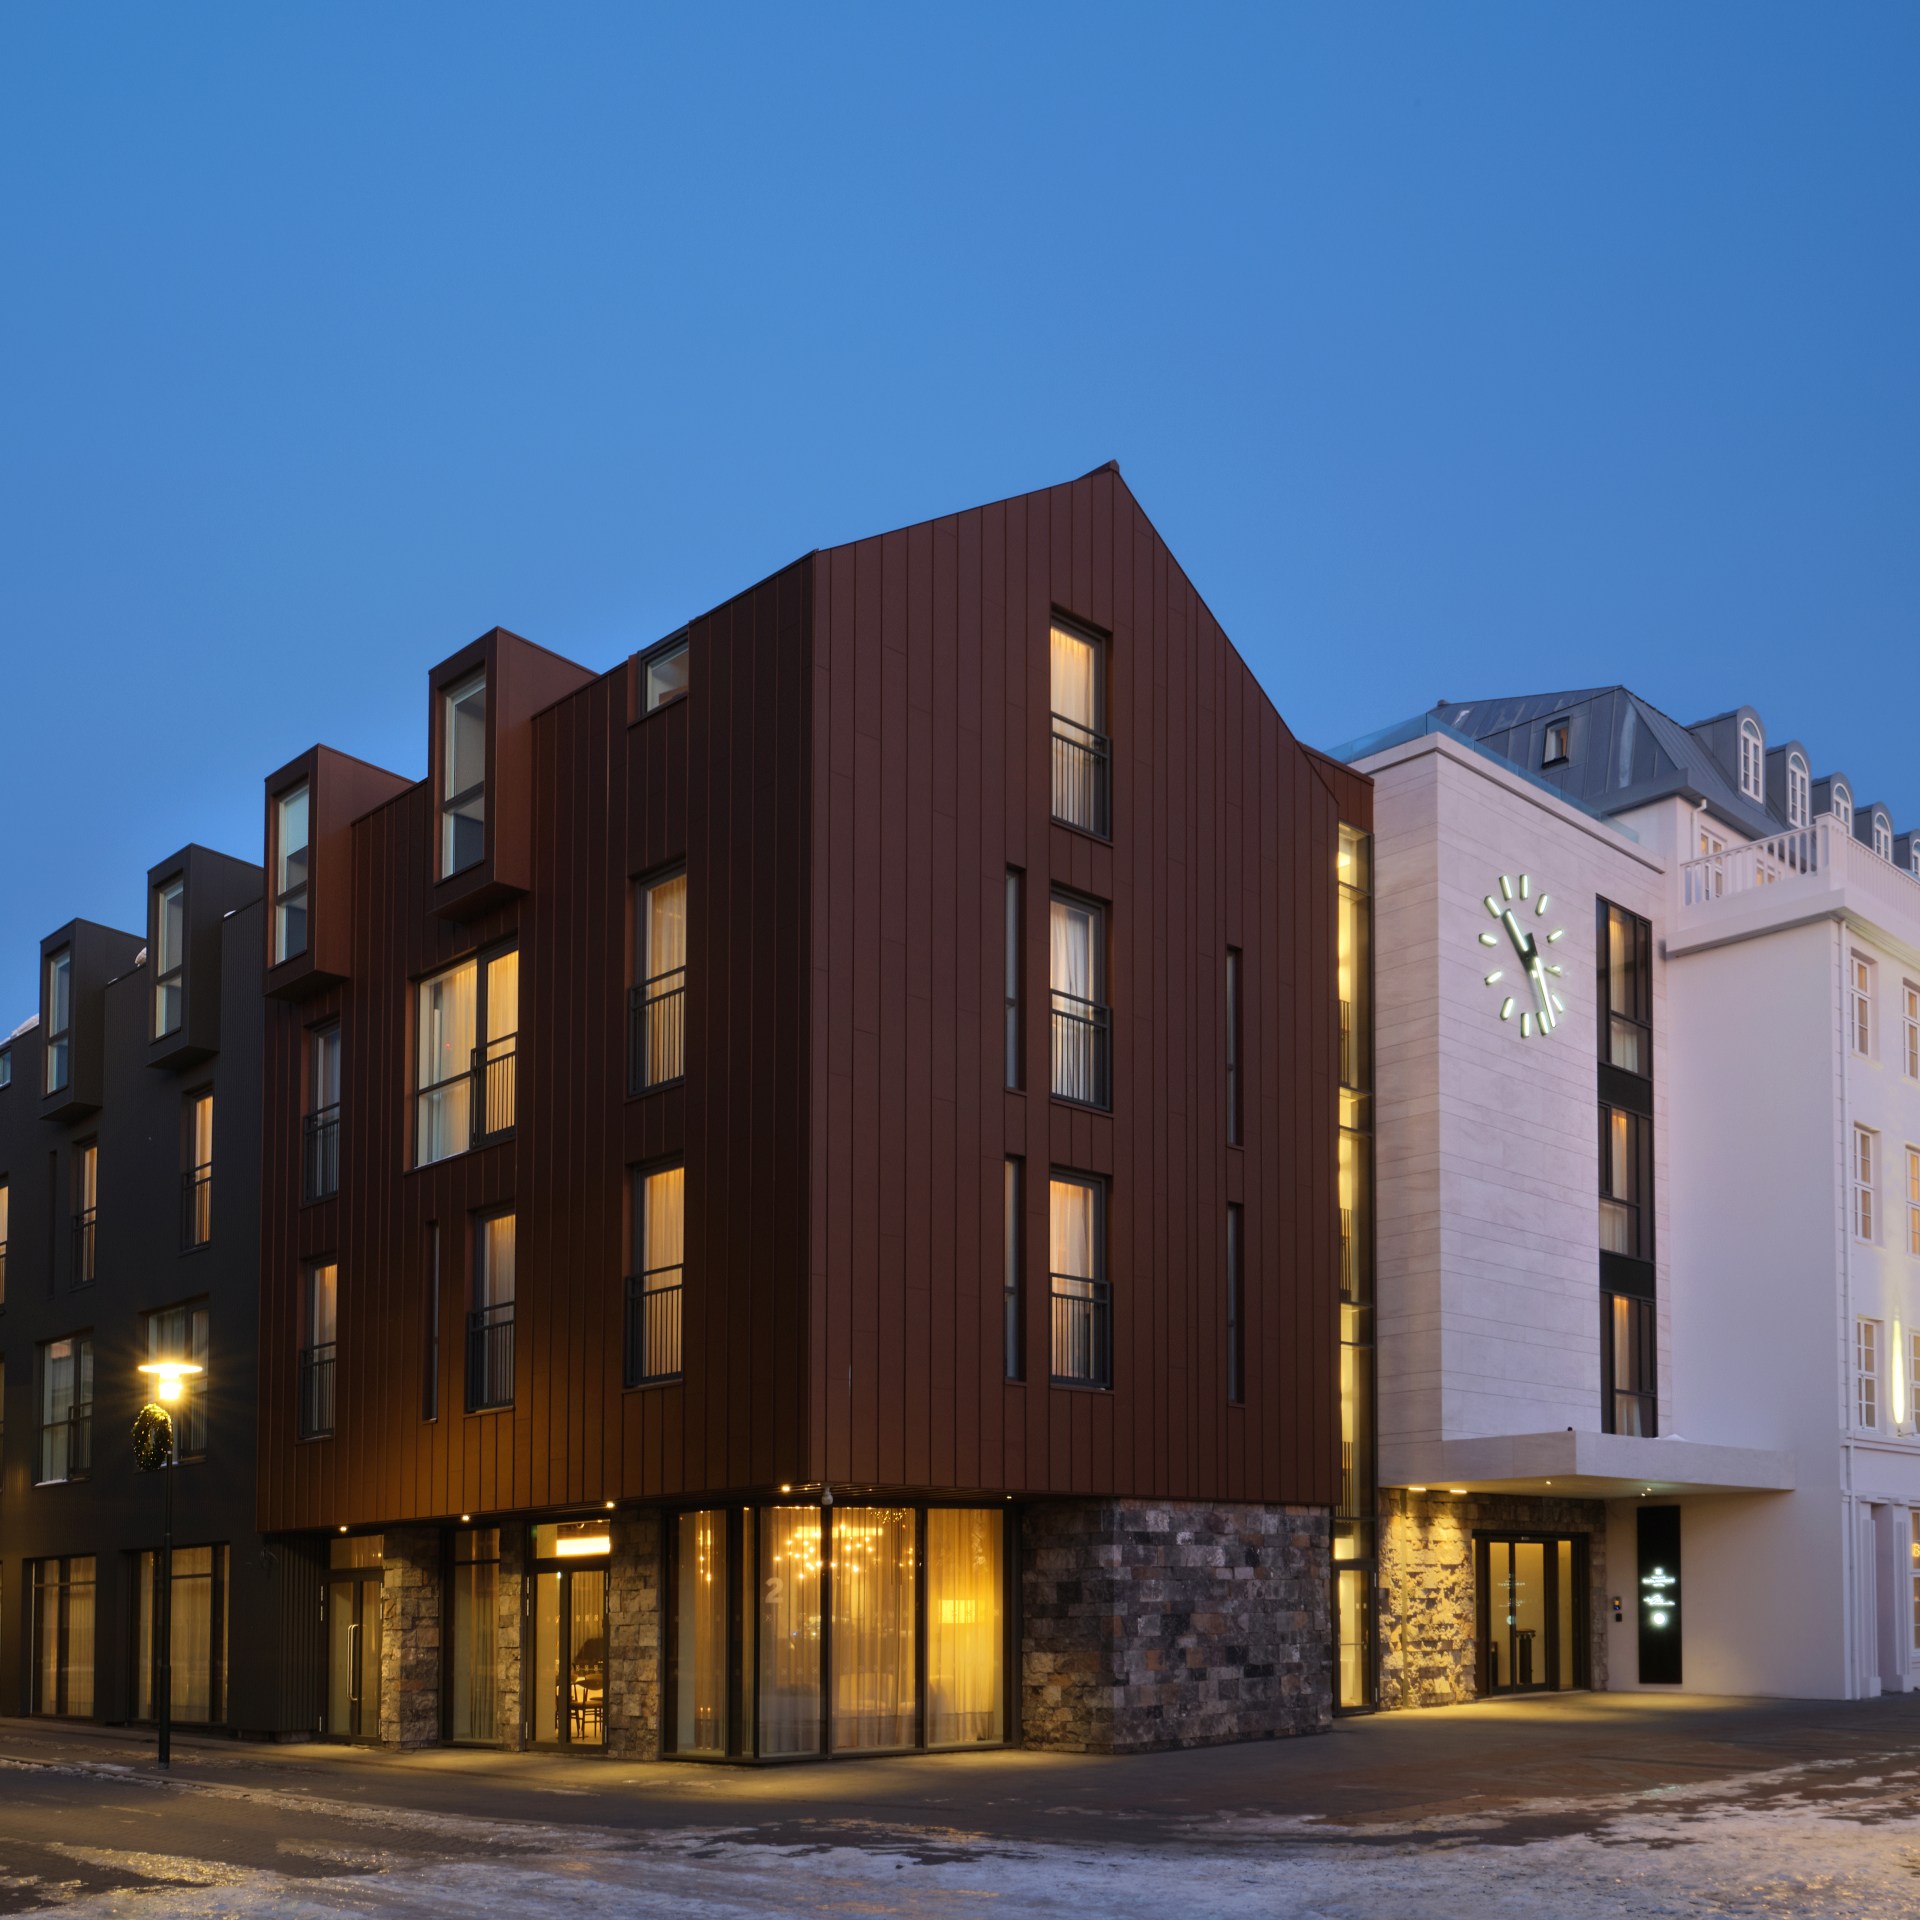 Iceland Parliament Hotel, Curio Collection by Hilton Exterior, night